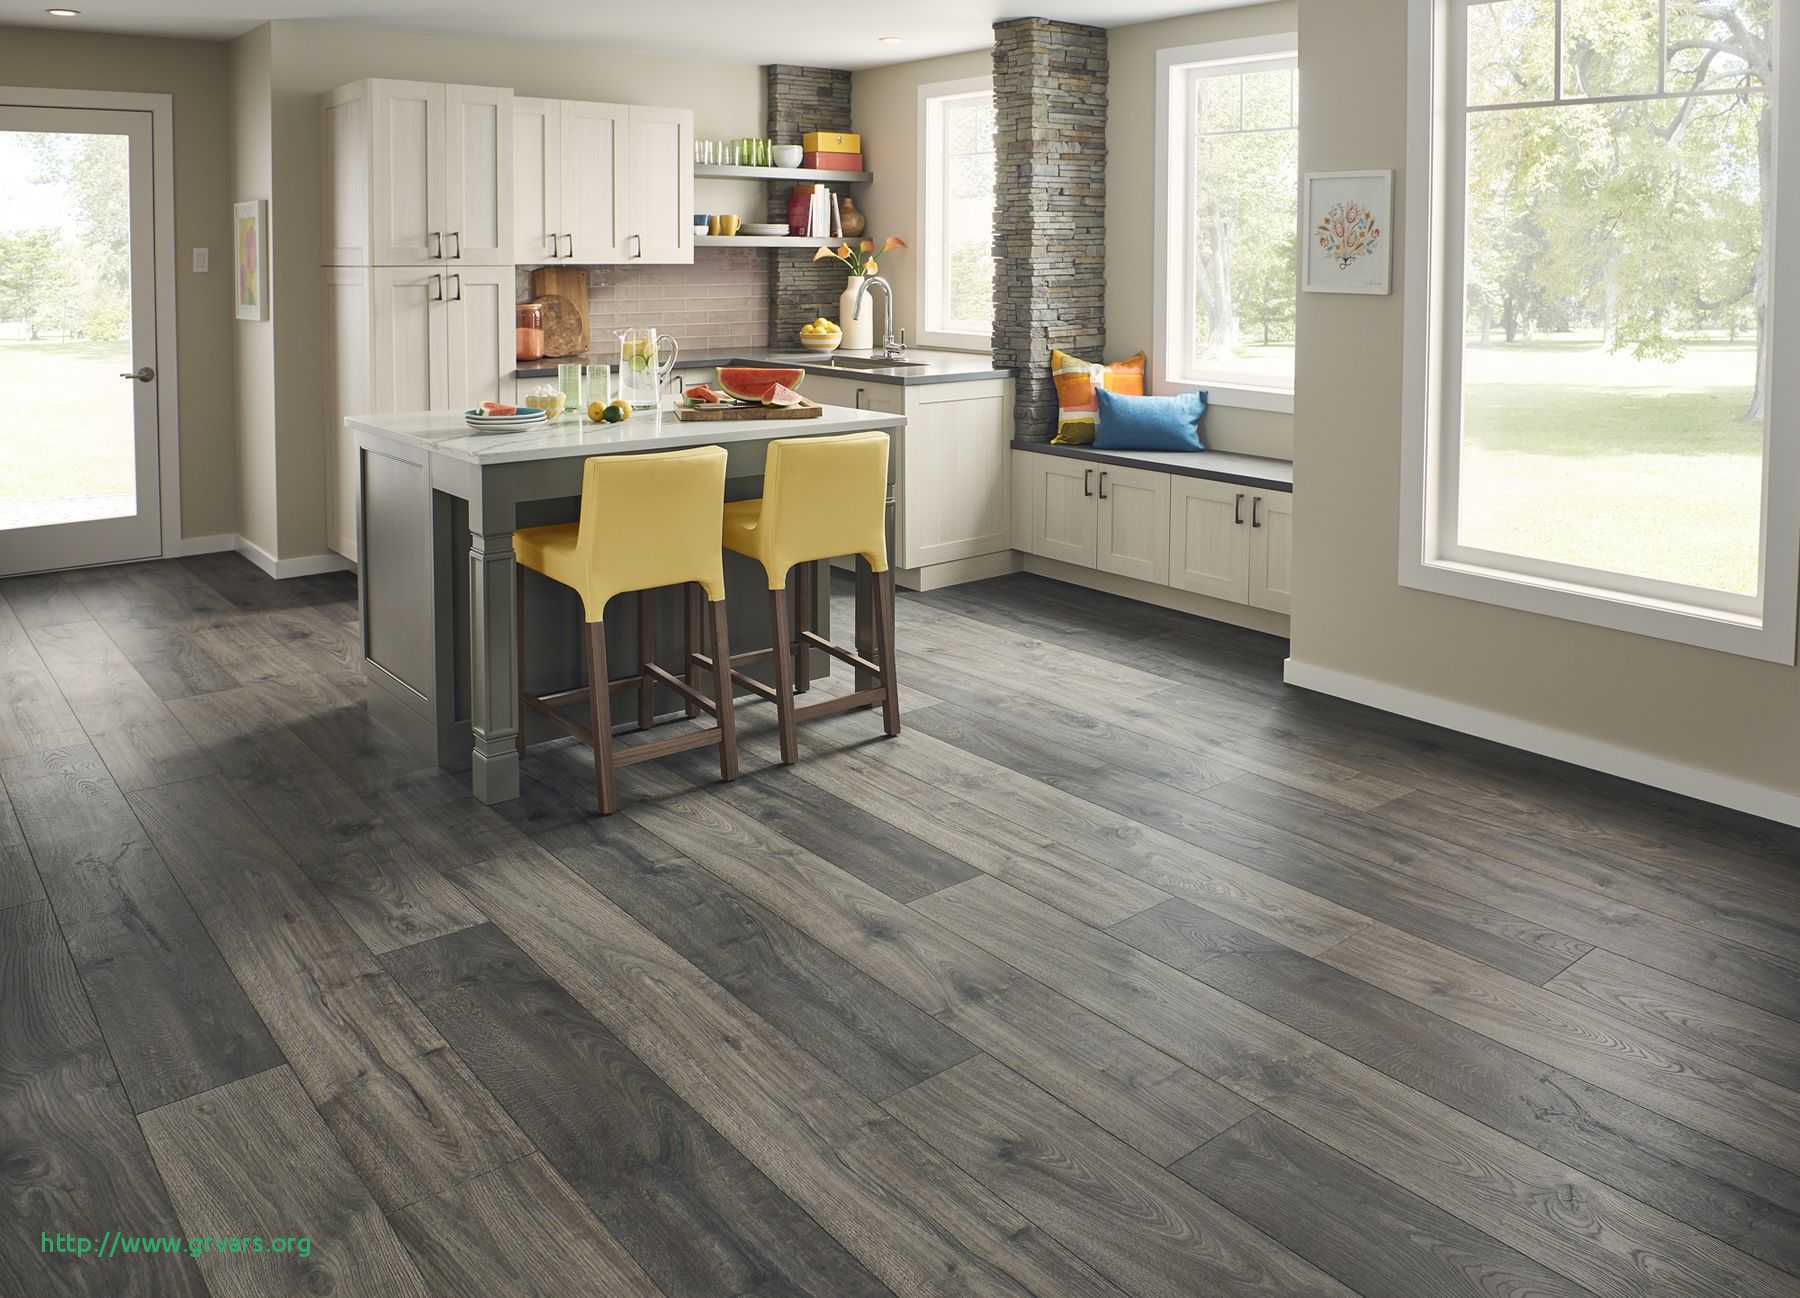 armstrong hardwood flooring company of 20 nouveau hazy hardwood floors ideas blog throughout 0d grace place barnegat hazy hardwood floors beau let your imagination roll with the smoky charcoal grays haze blue